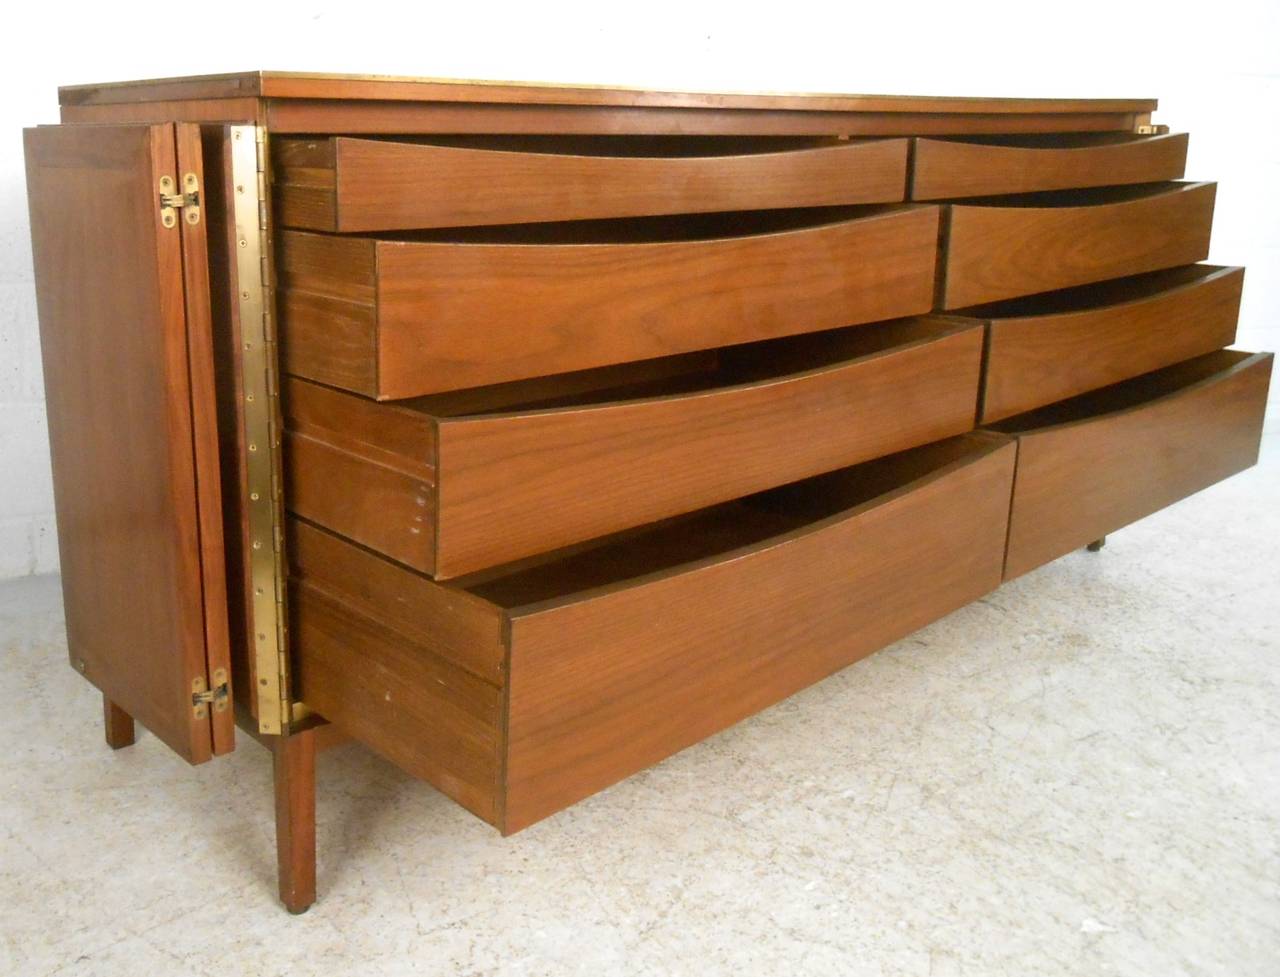 American Unique Mid-Century Modern Cane Front Dresser by Paul McCobb for Calvin